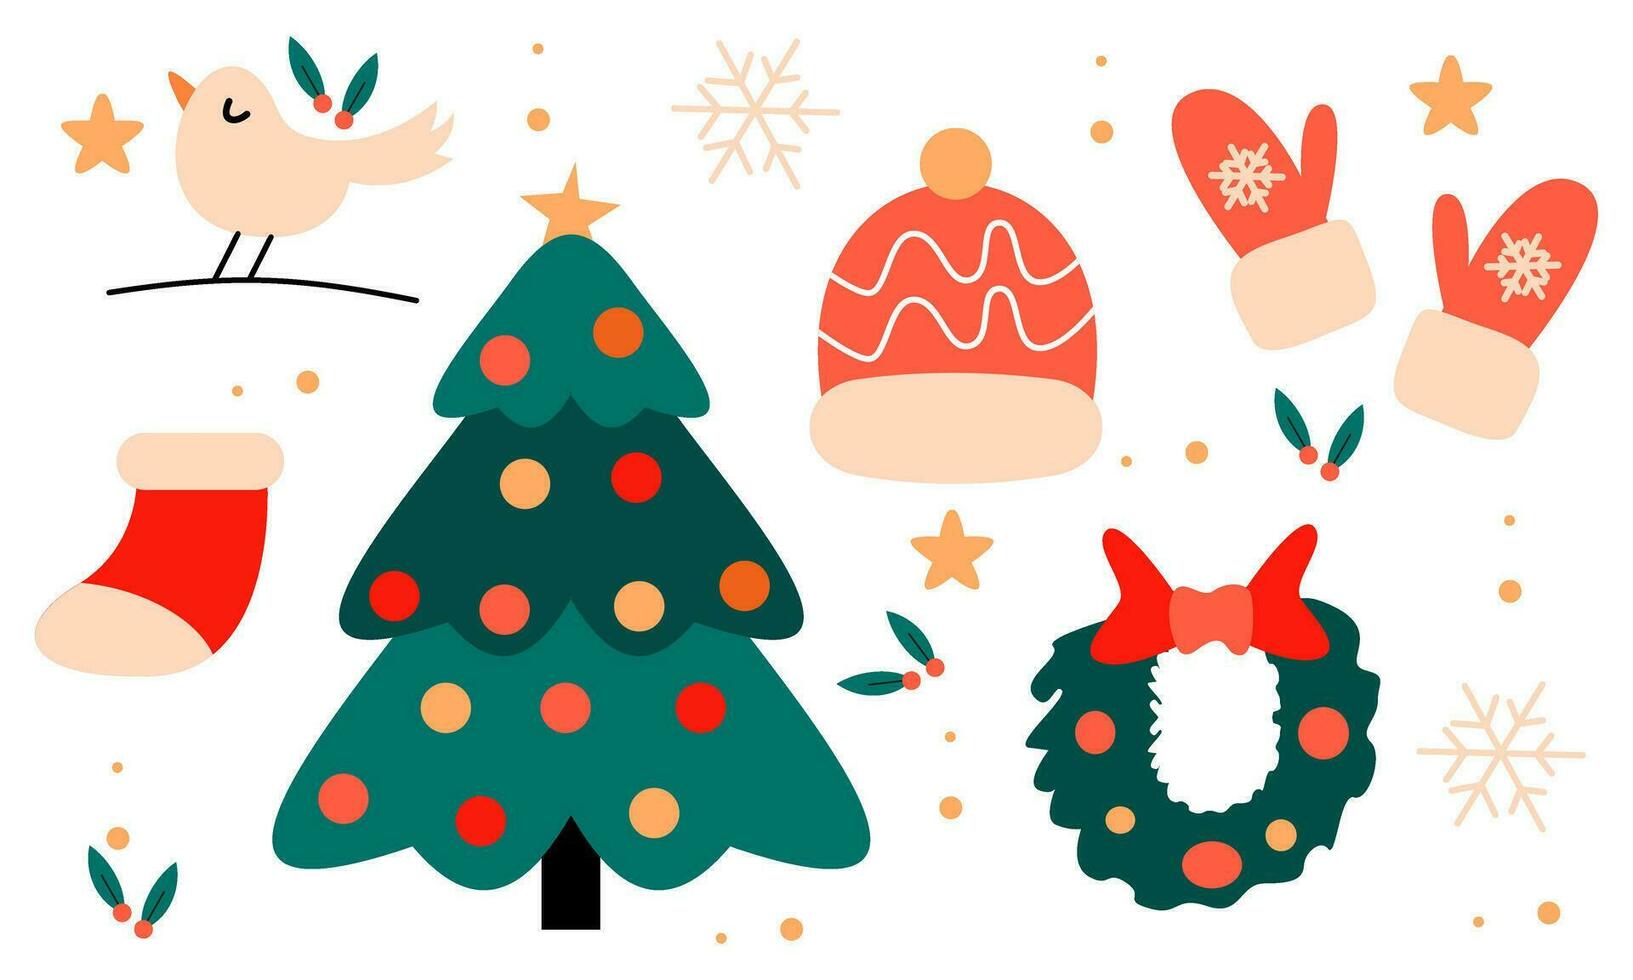 Christmas collection of decorative winter elements vector